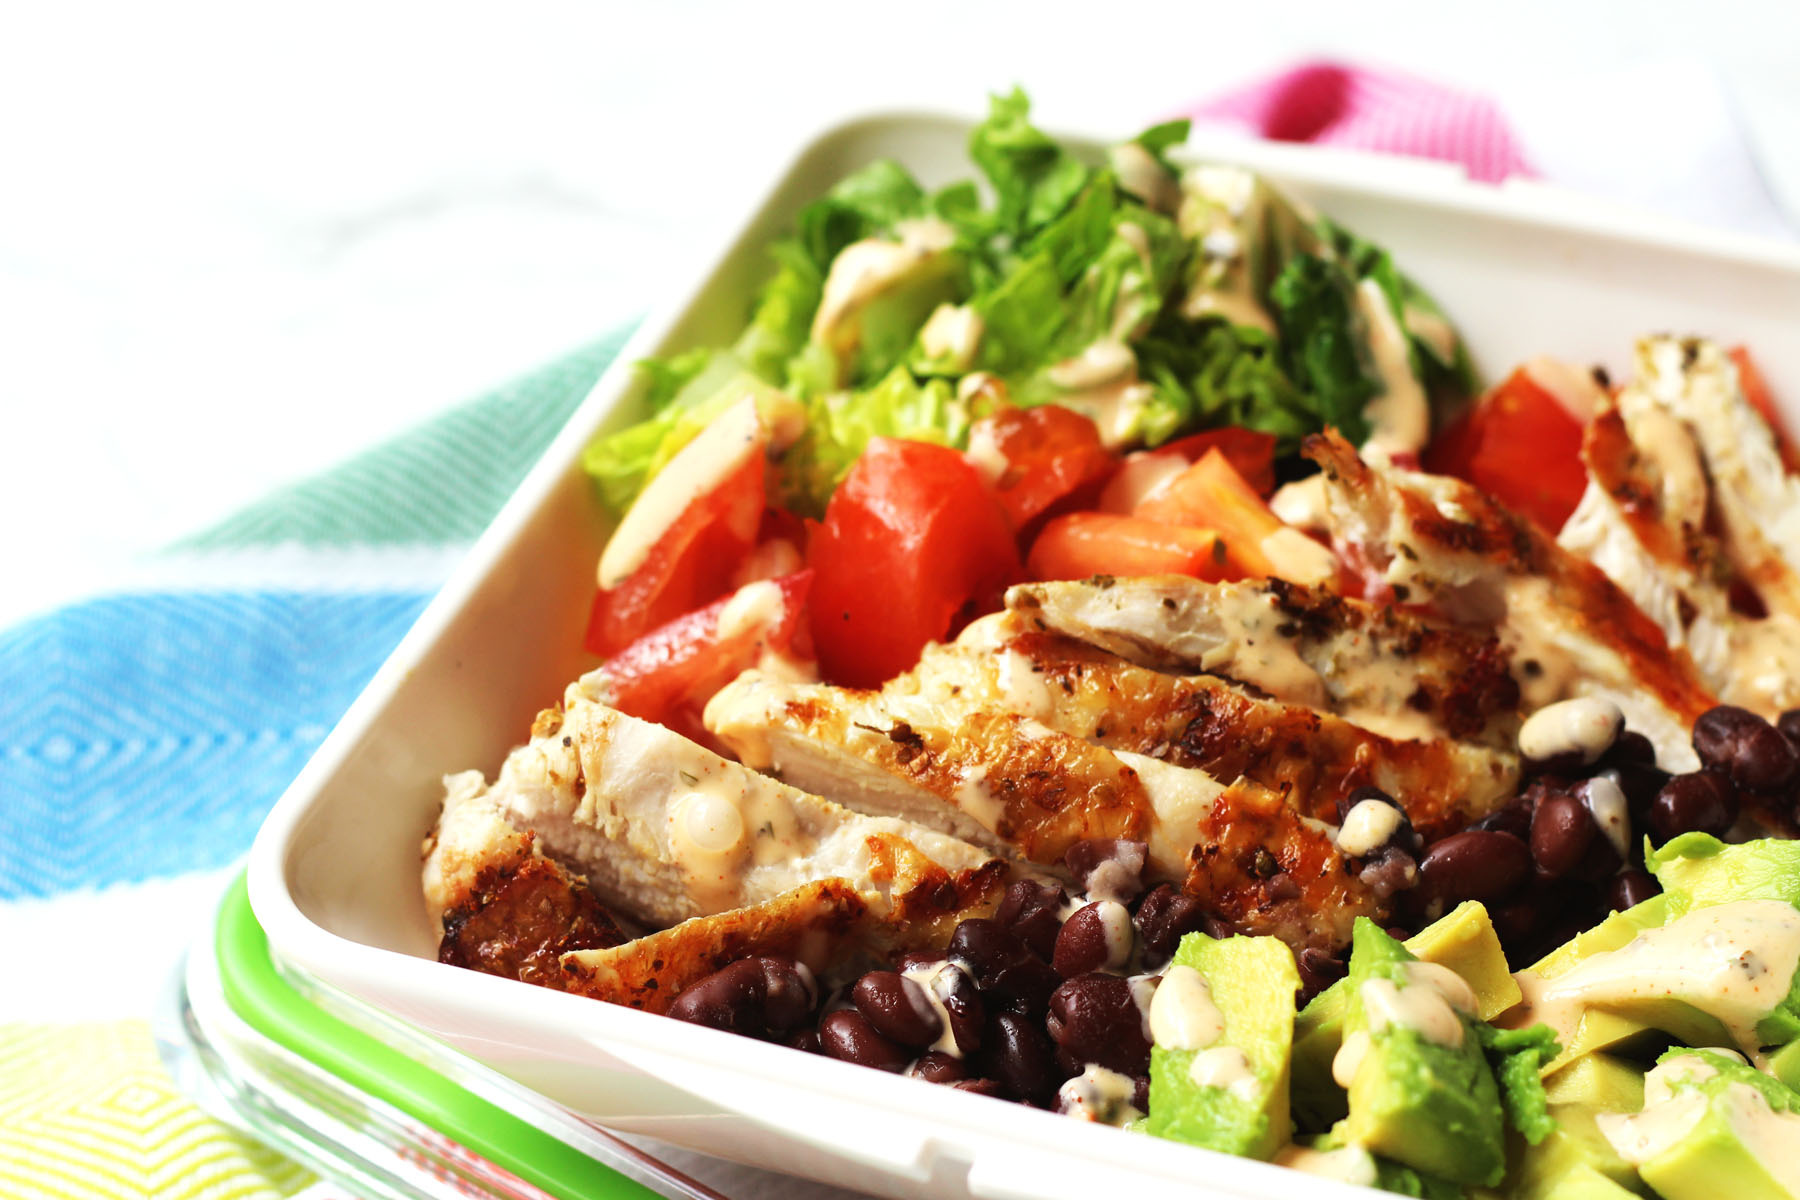 Chicken and Avocado Salad with black beans and smokey buttermilk dressing